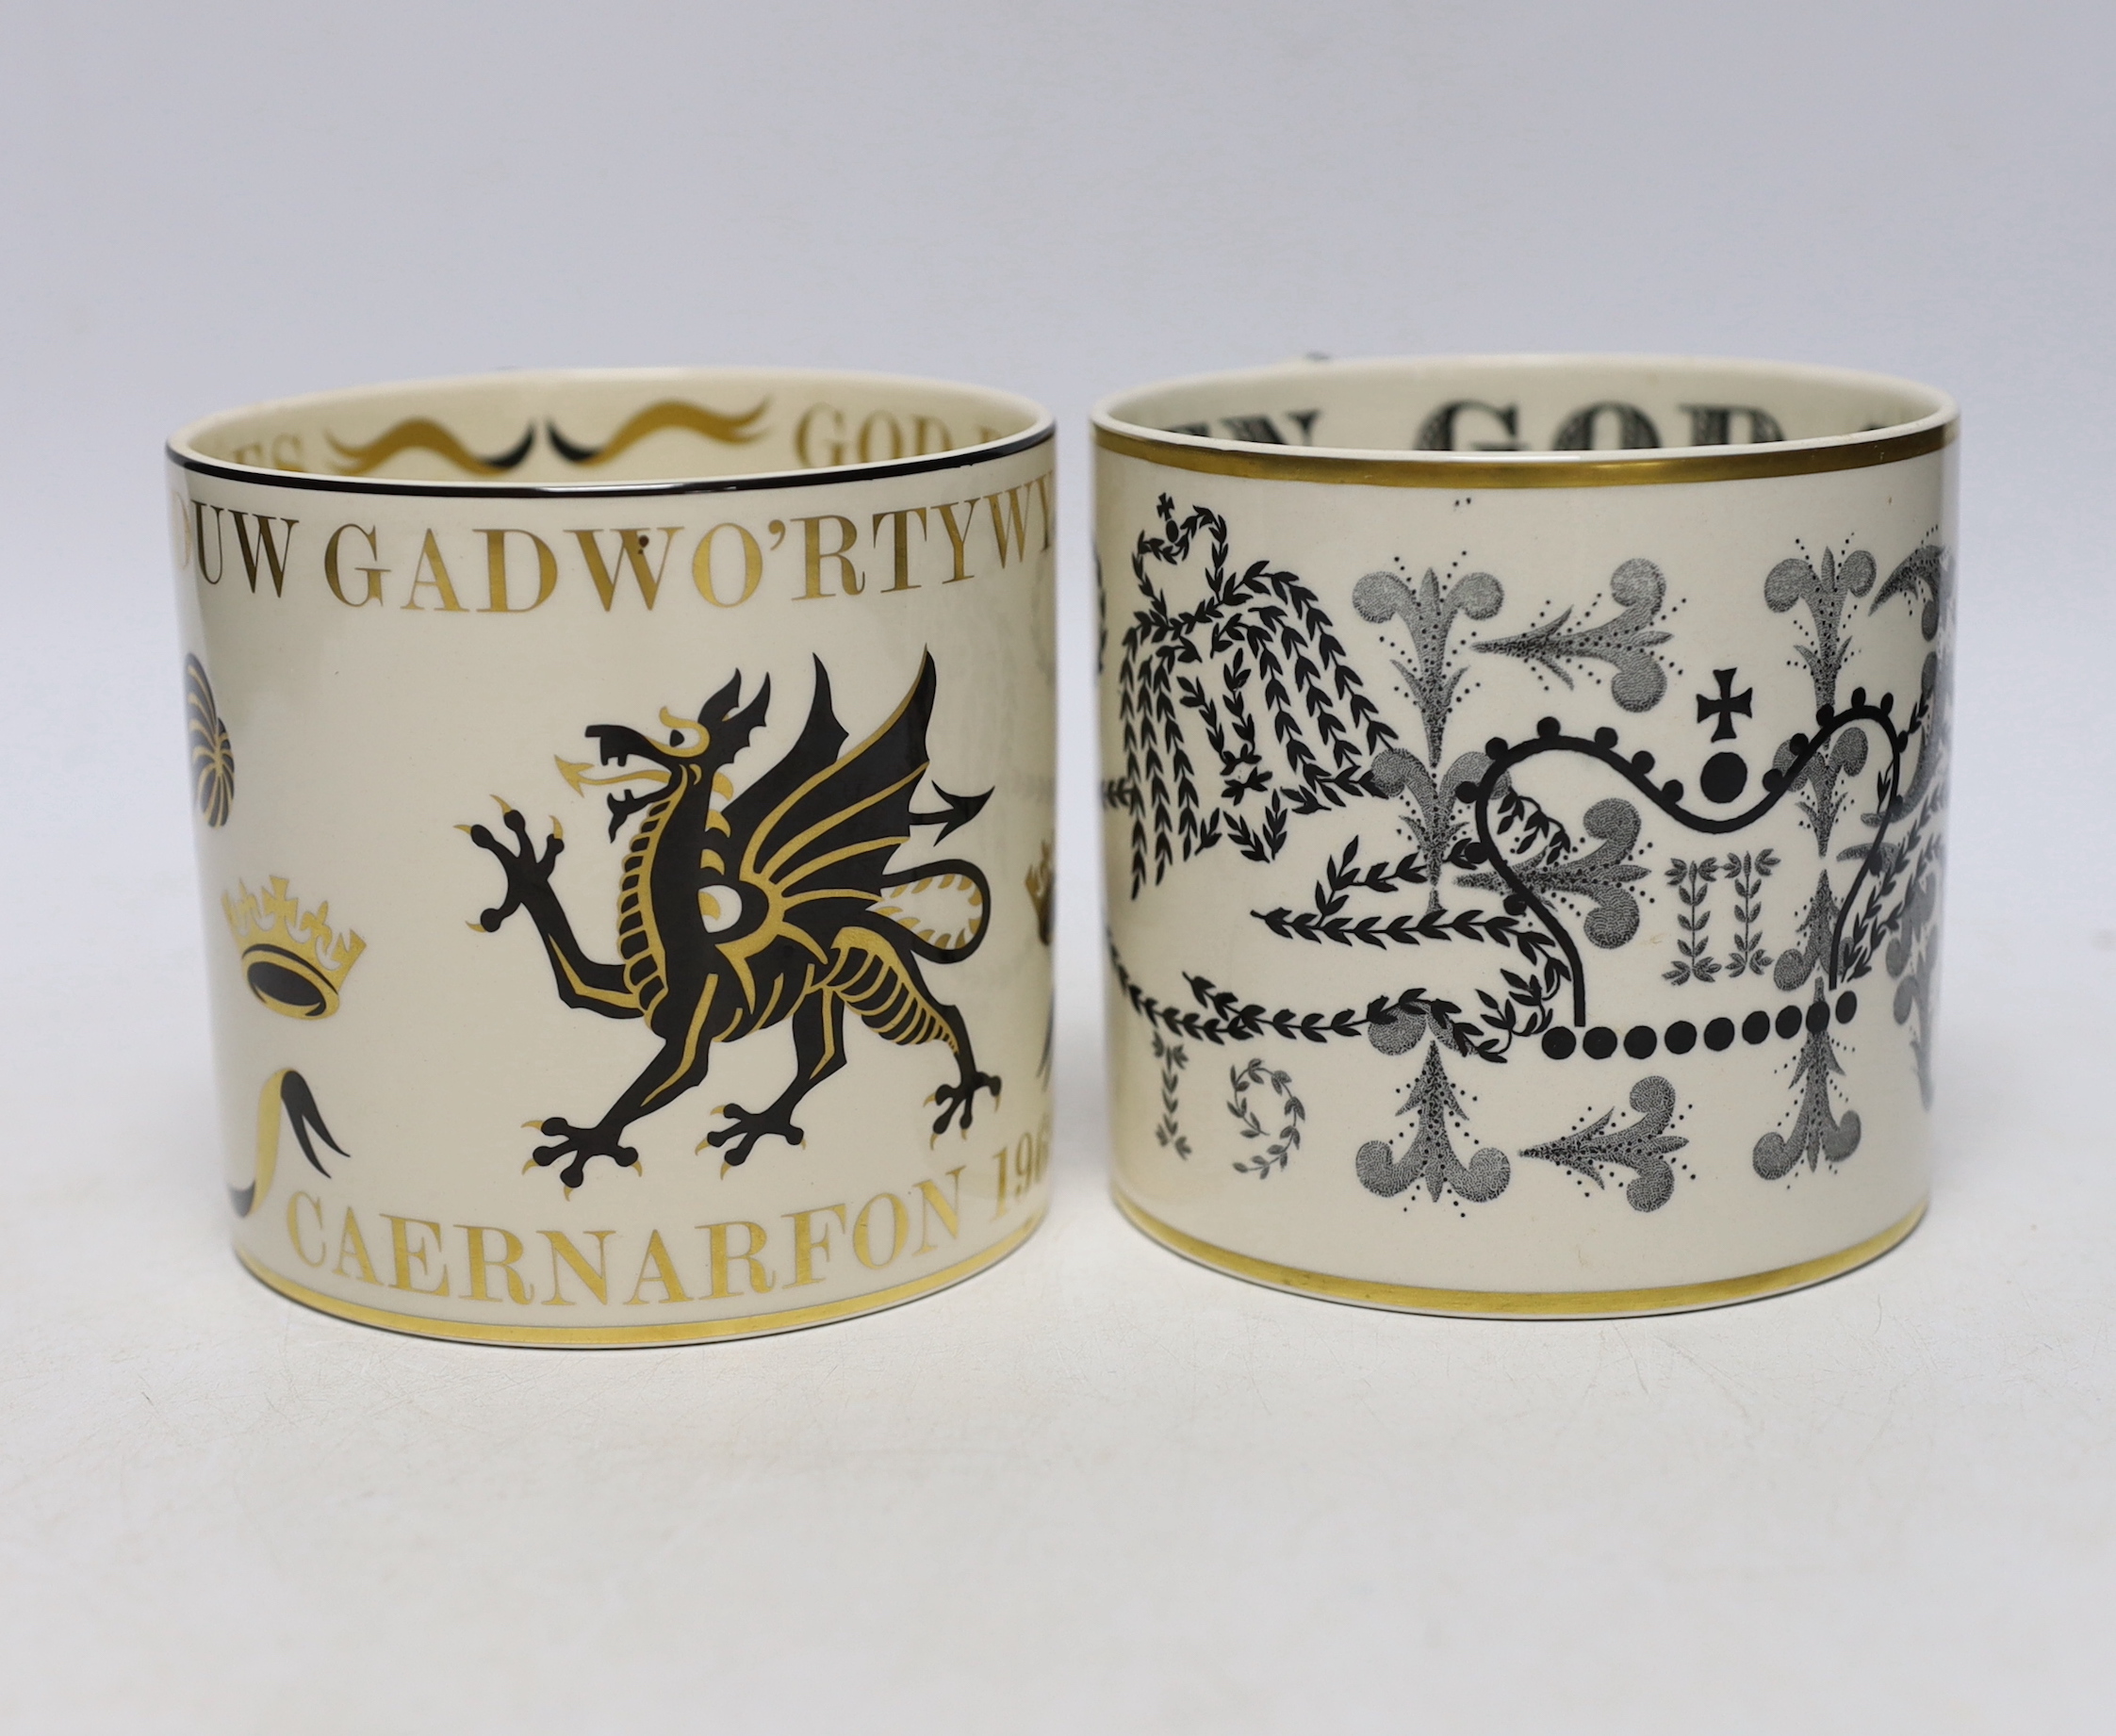 Two Wedgwood commemorative mugs by Guyatt; the Investiture of the Prince of Wales and the Coronation of Queen Elizabeth II